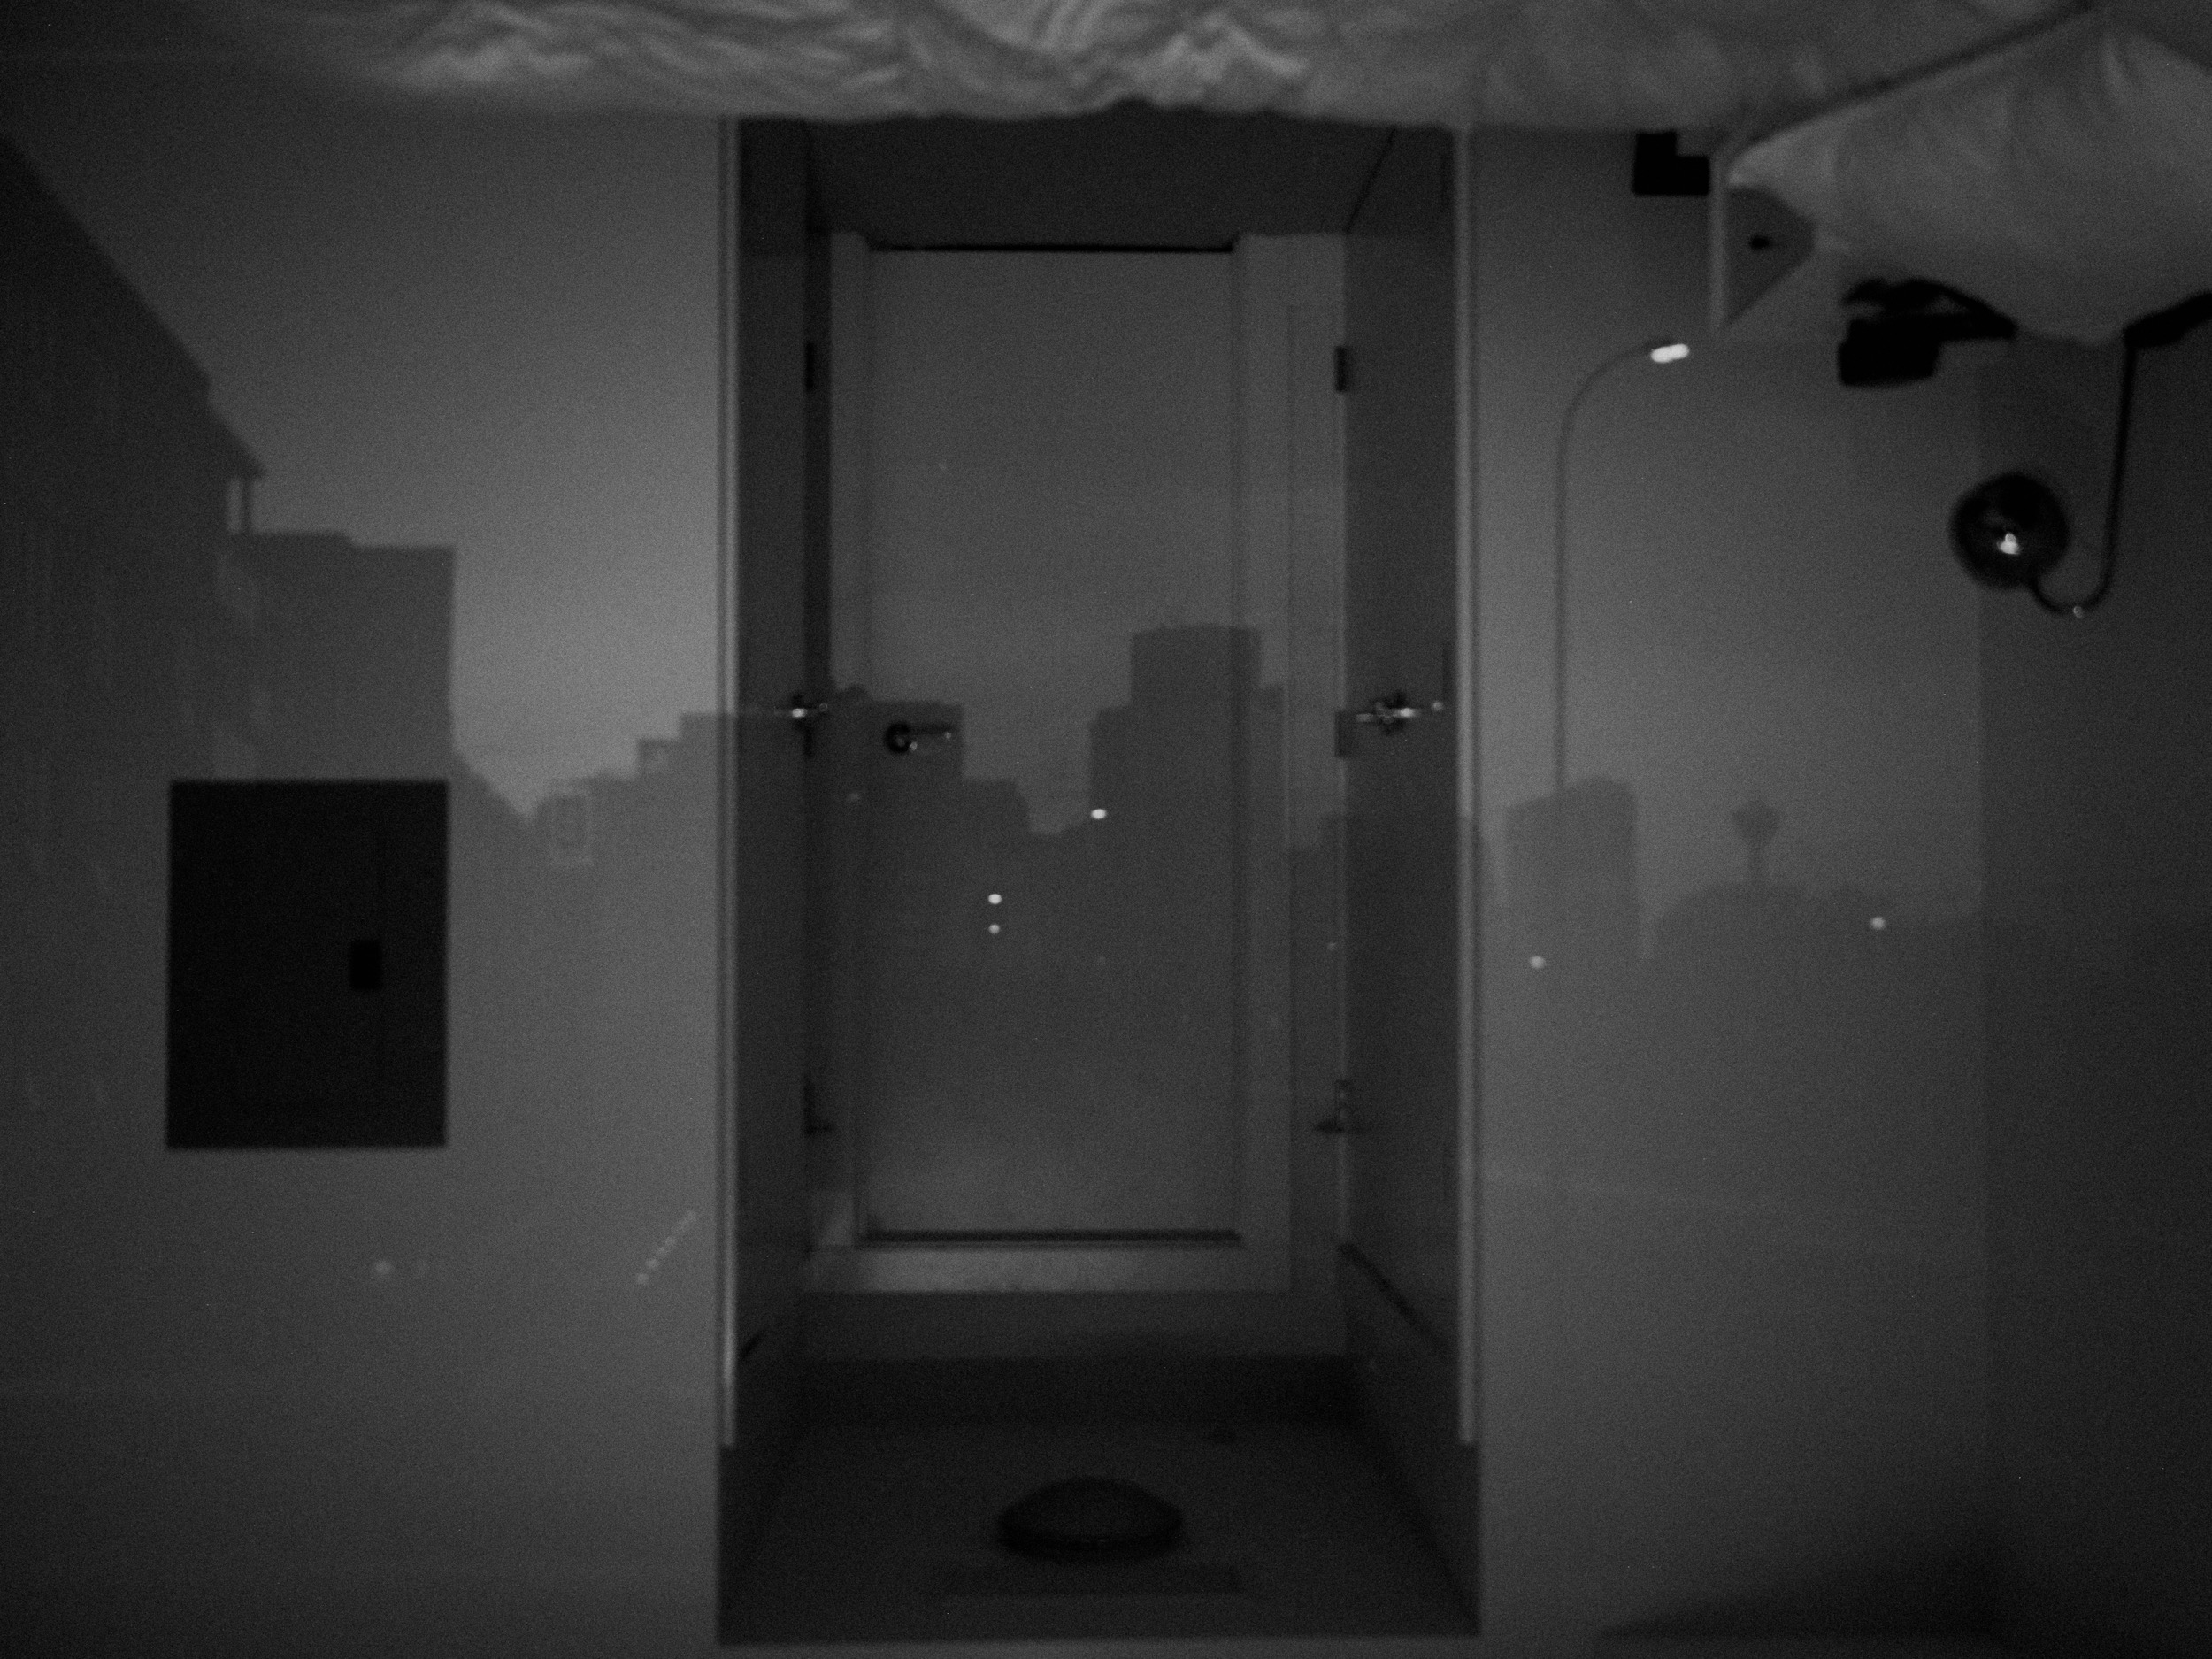  The eclipse pinhole viewers reminded me of a tradition at my school. One of the photography classes would black out all the windows in a classroom and make a room-sized pinhole camera. I never had the chance to participate so I made my own at home t